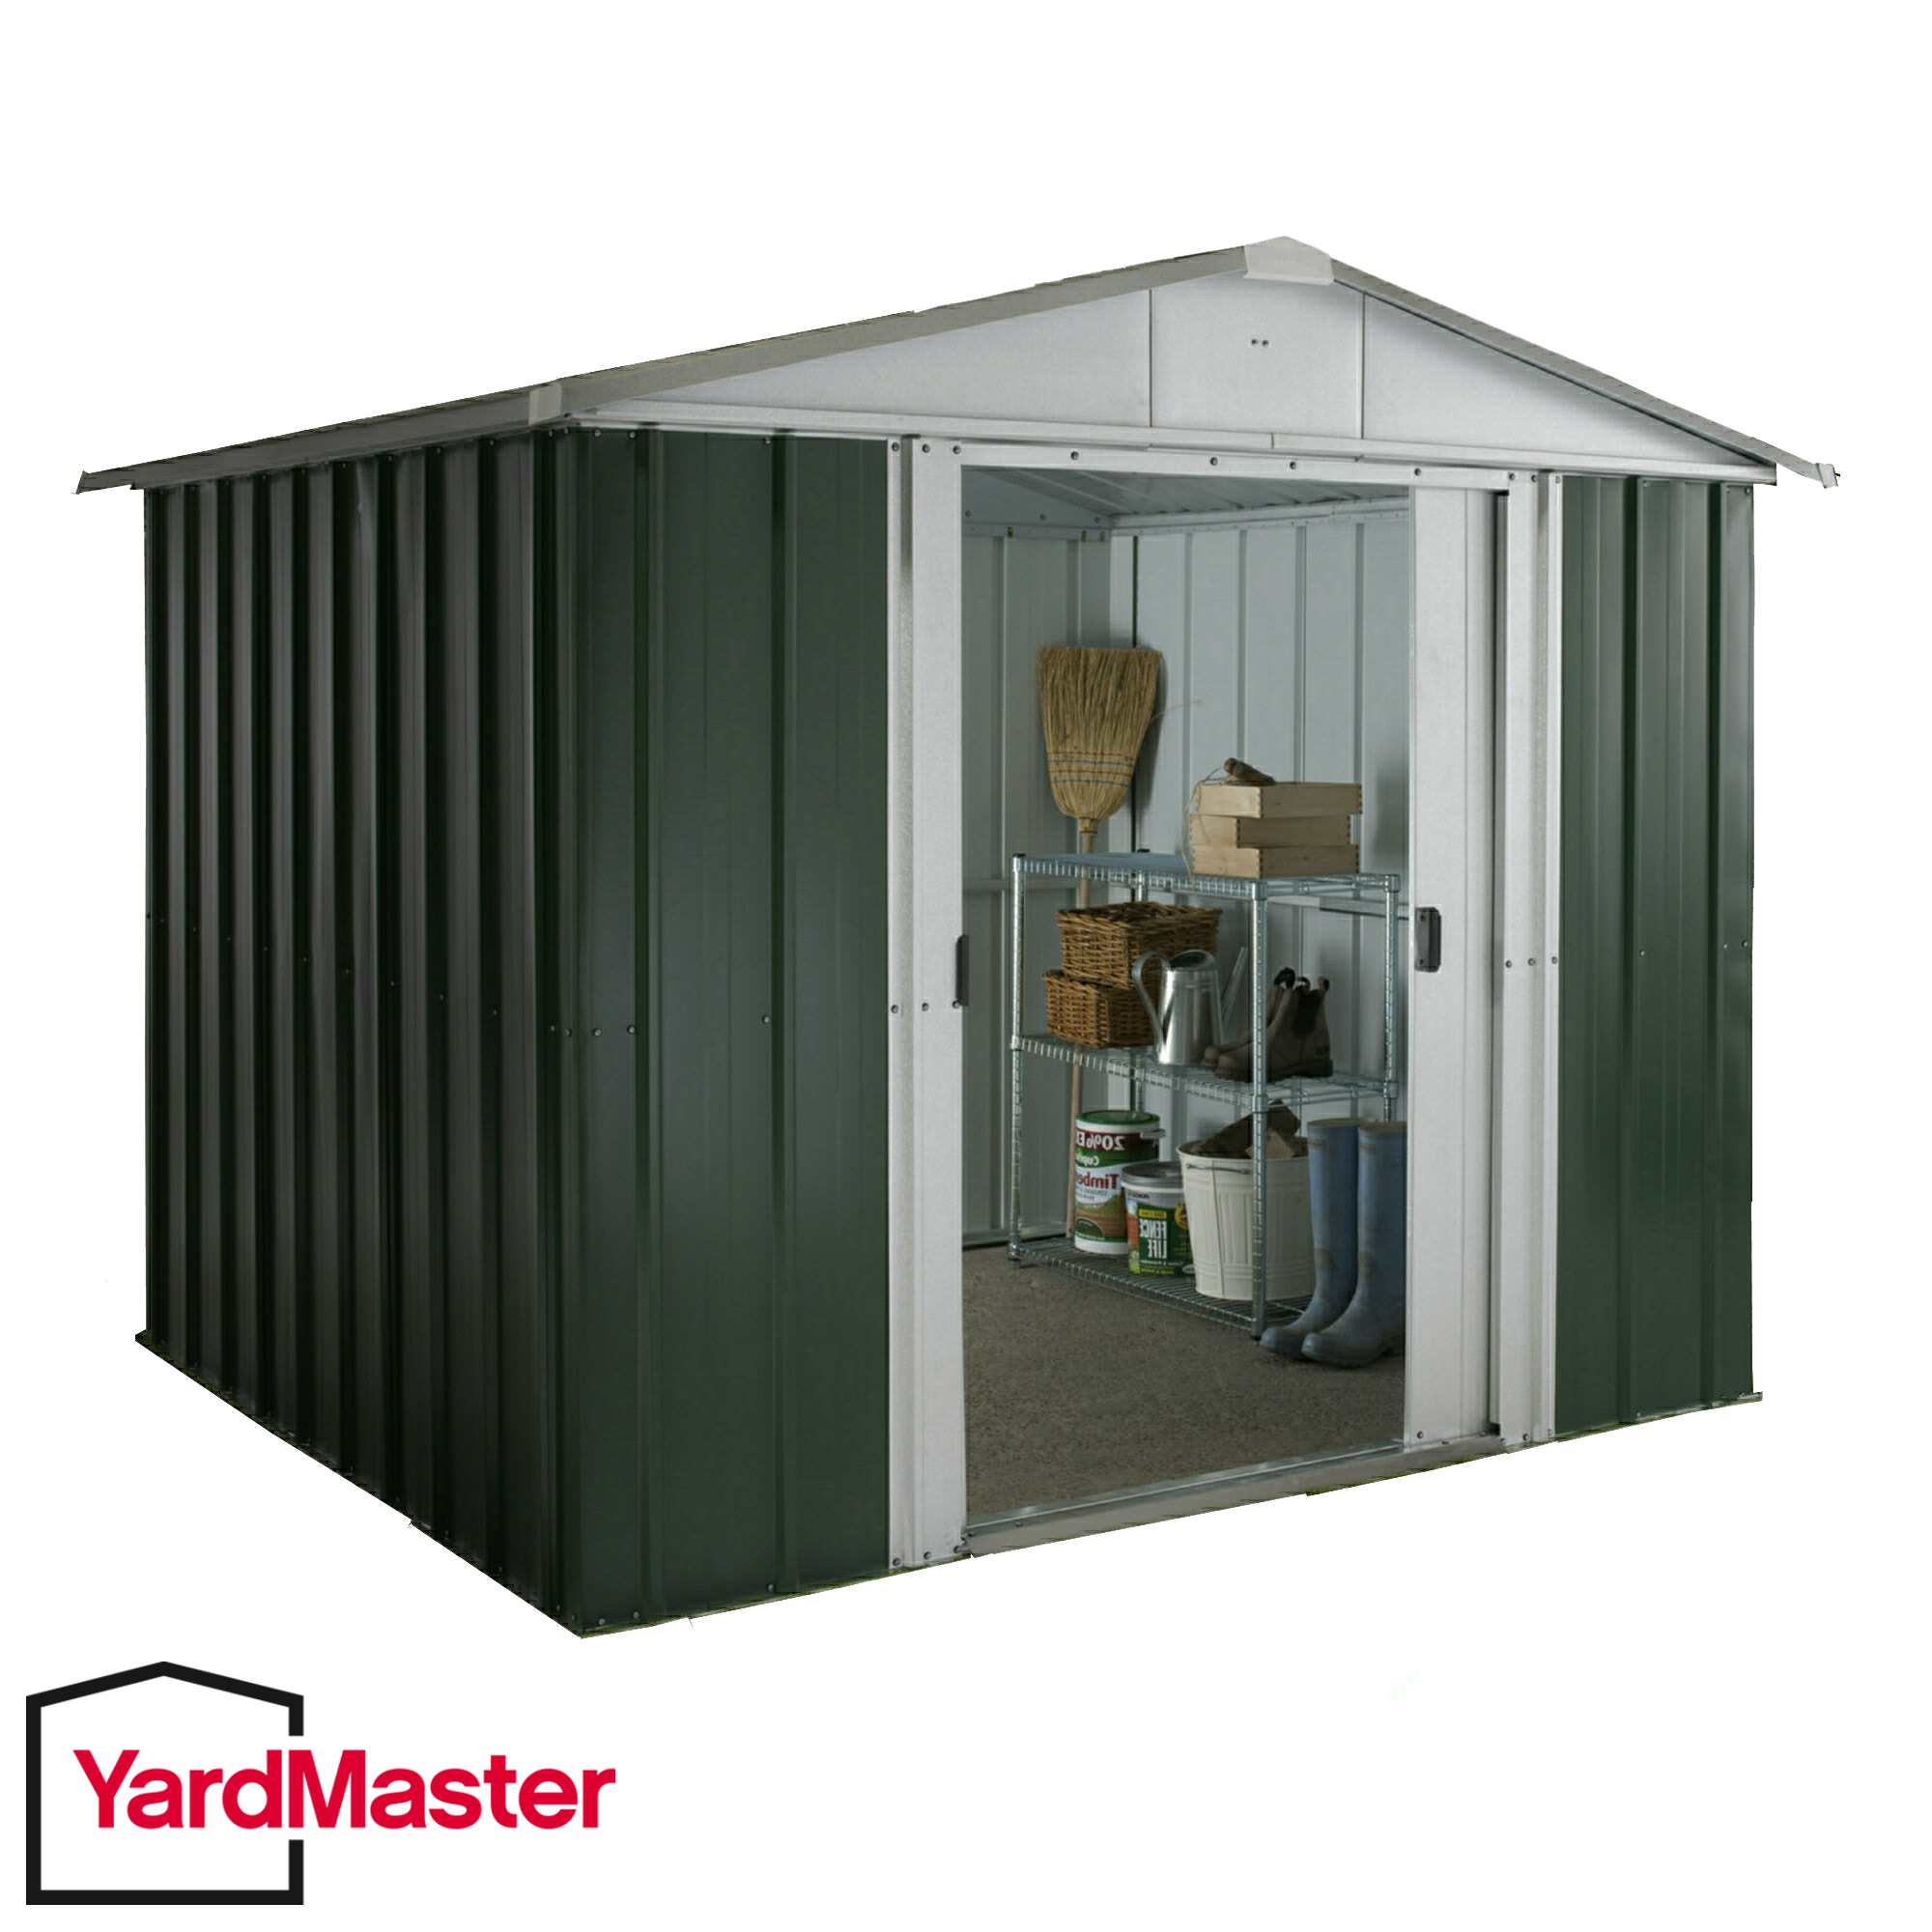 Featured image for “YardMaster 8x9 Emerald Deluxe Apex (GEYZ) Metal Shed”